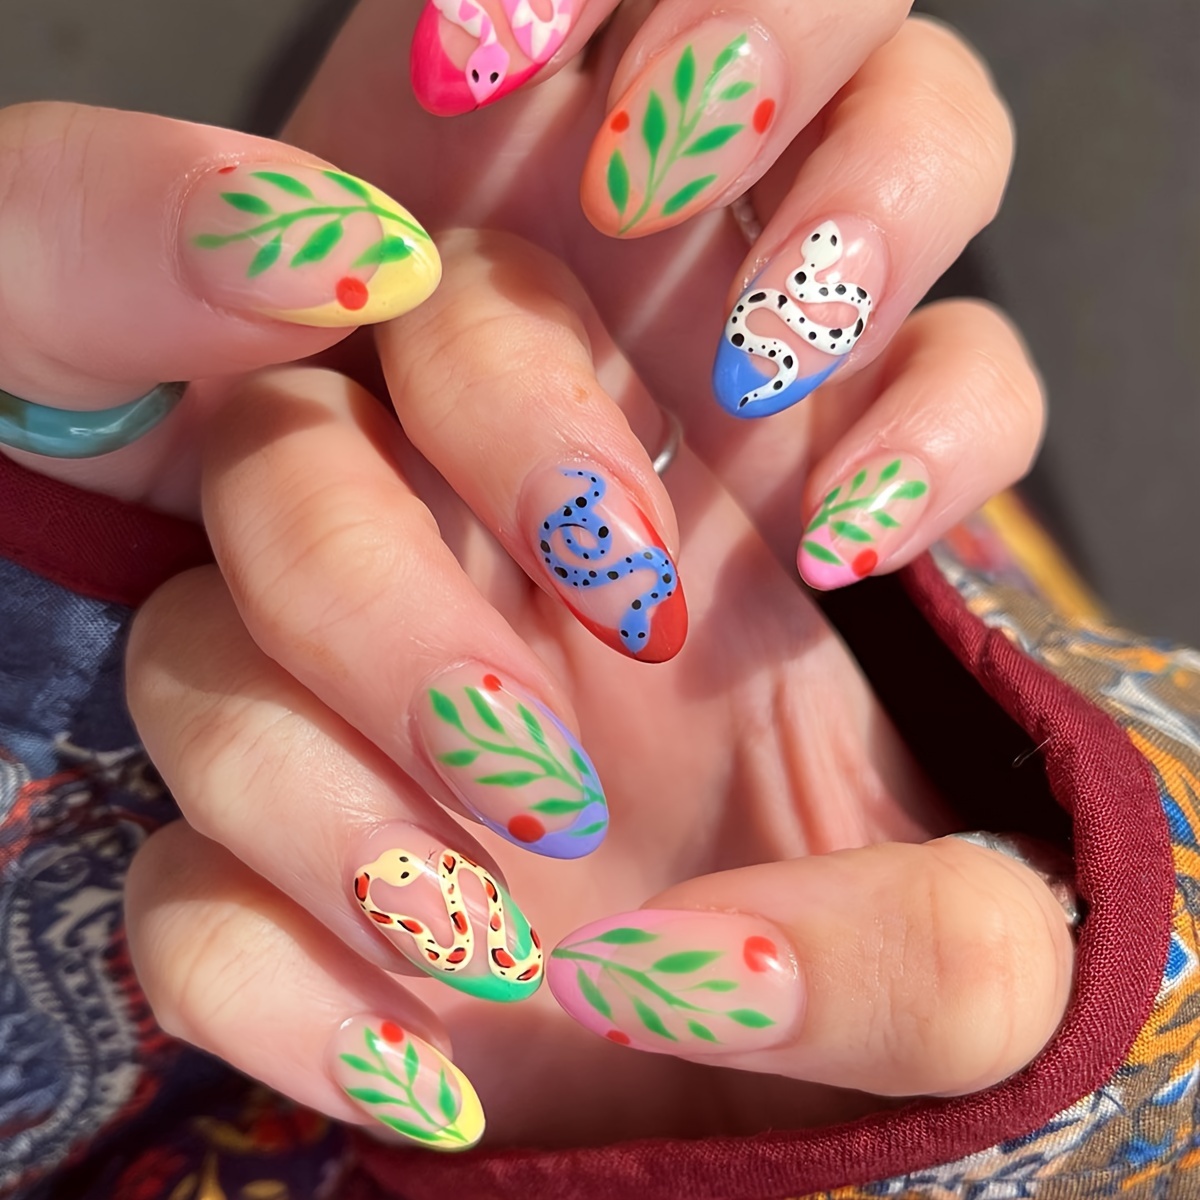 DIY Fake Nail Cute Short Round Nail with Flower Print Glossy Finish for  Daily Office Routine Duties - Walmart.com